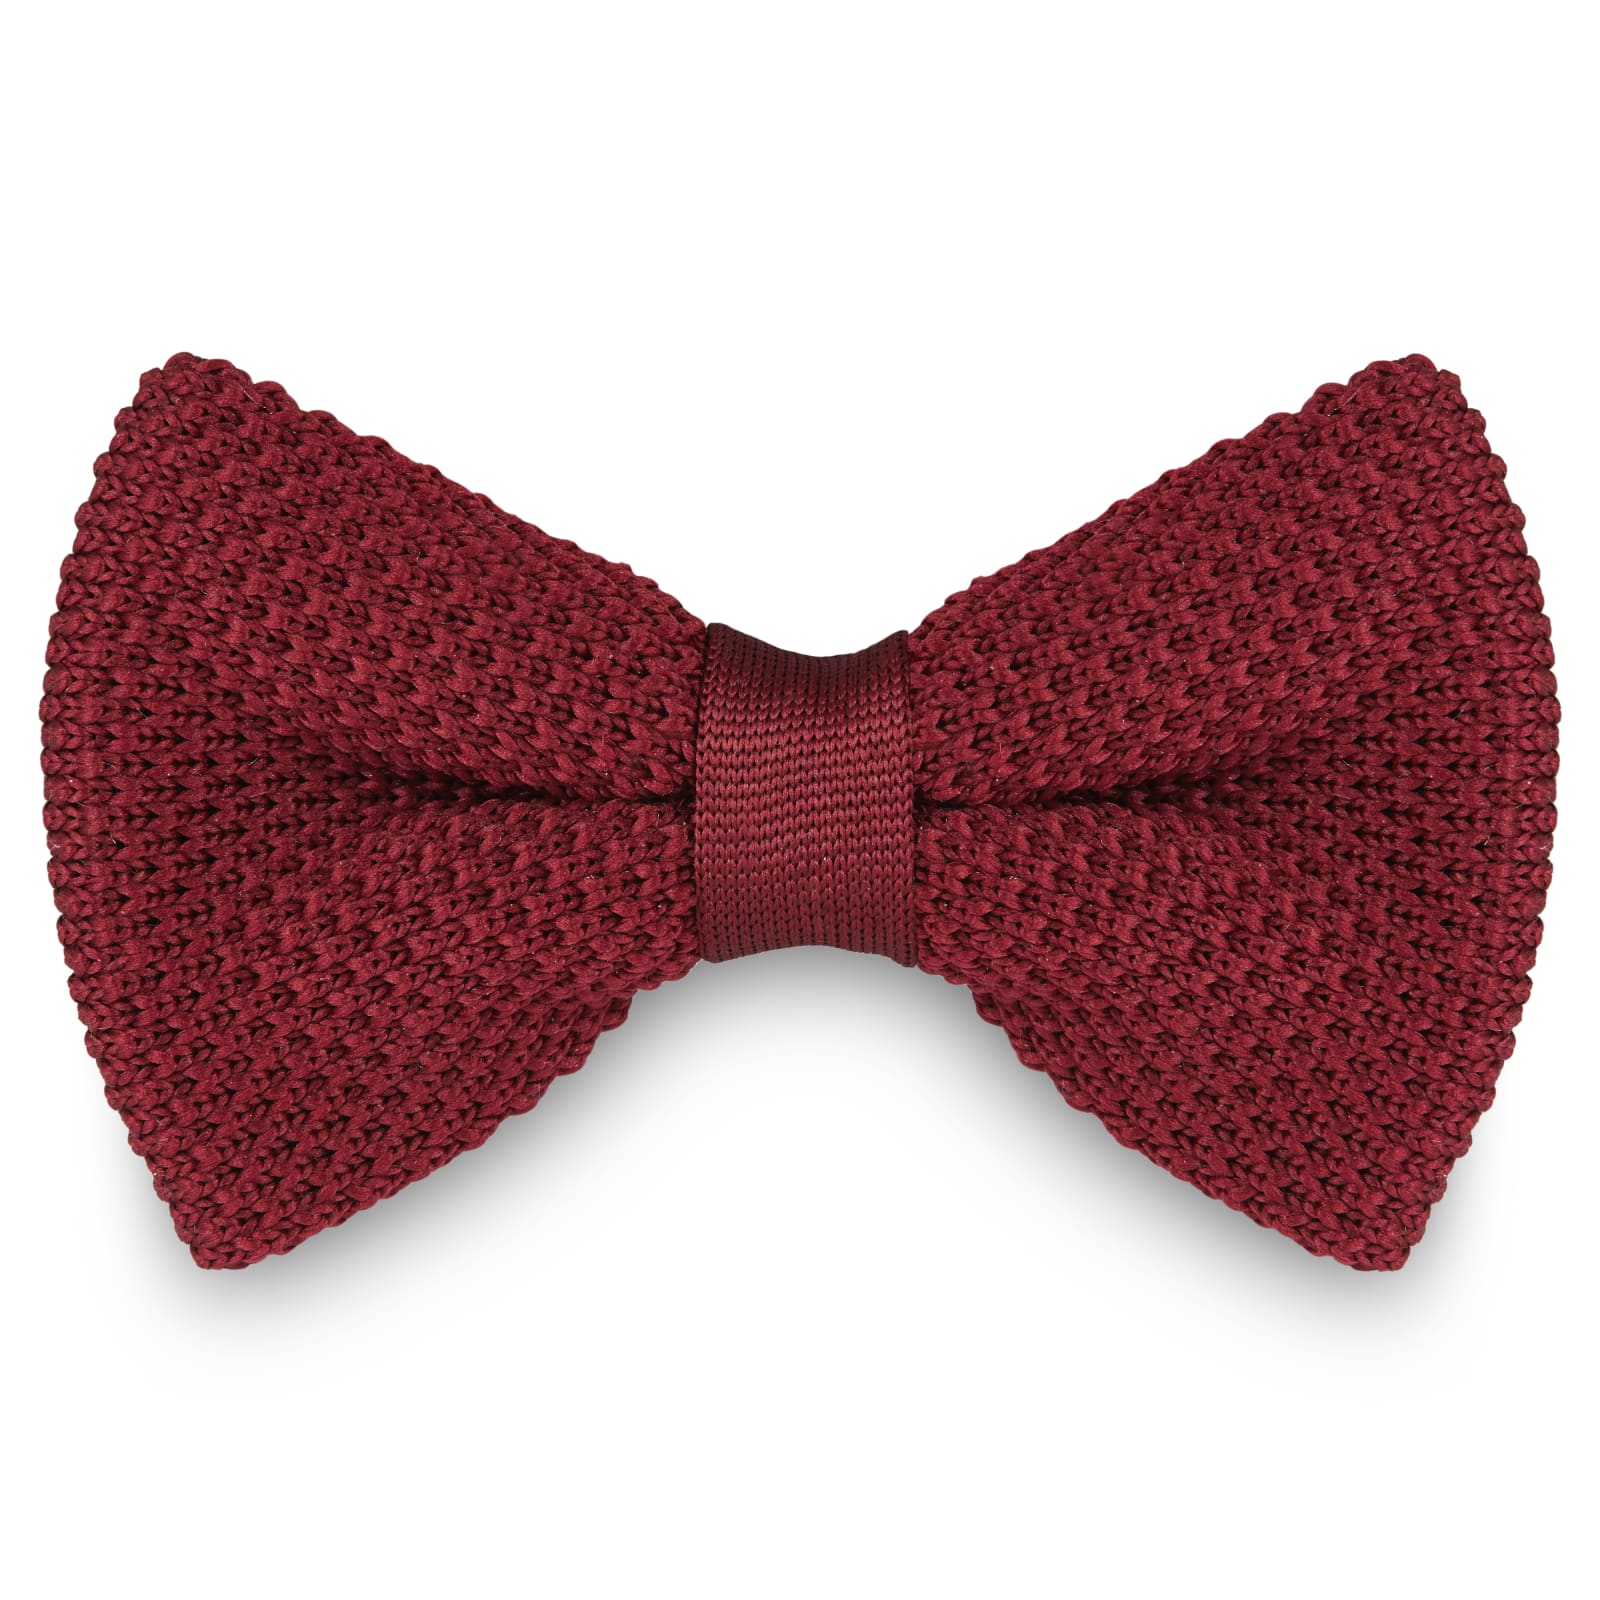 MAROON KNITTED BOW TIES